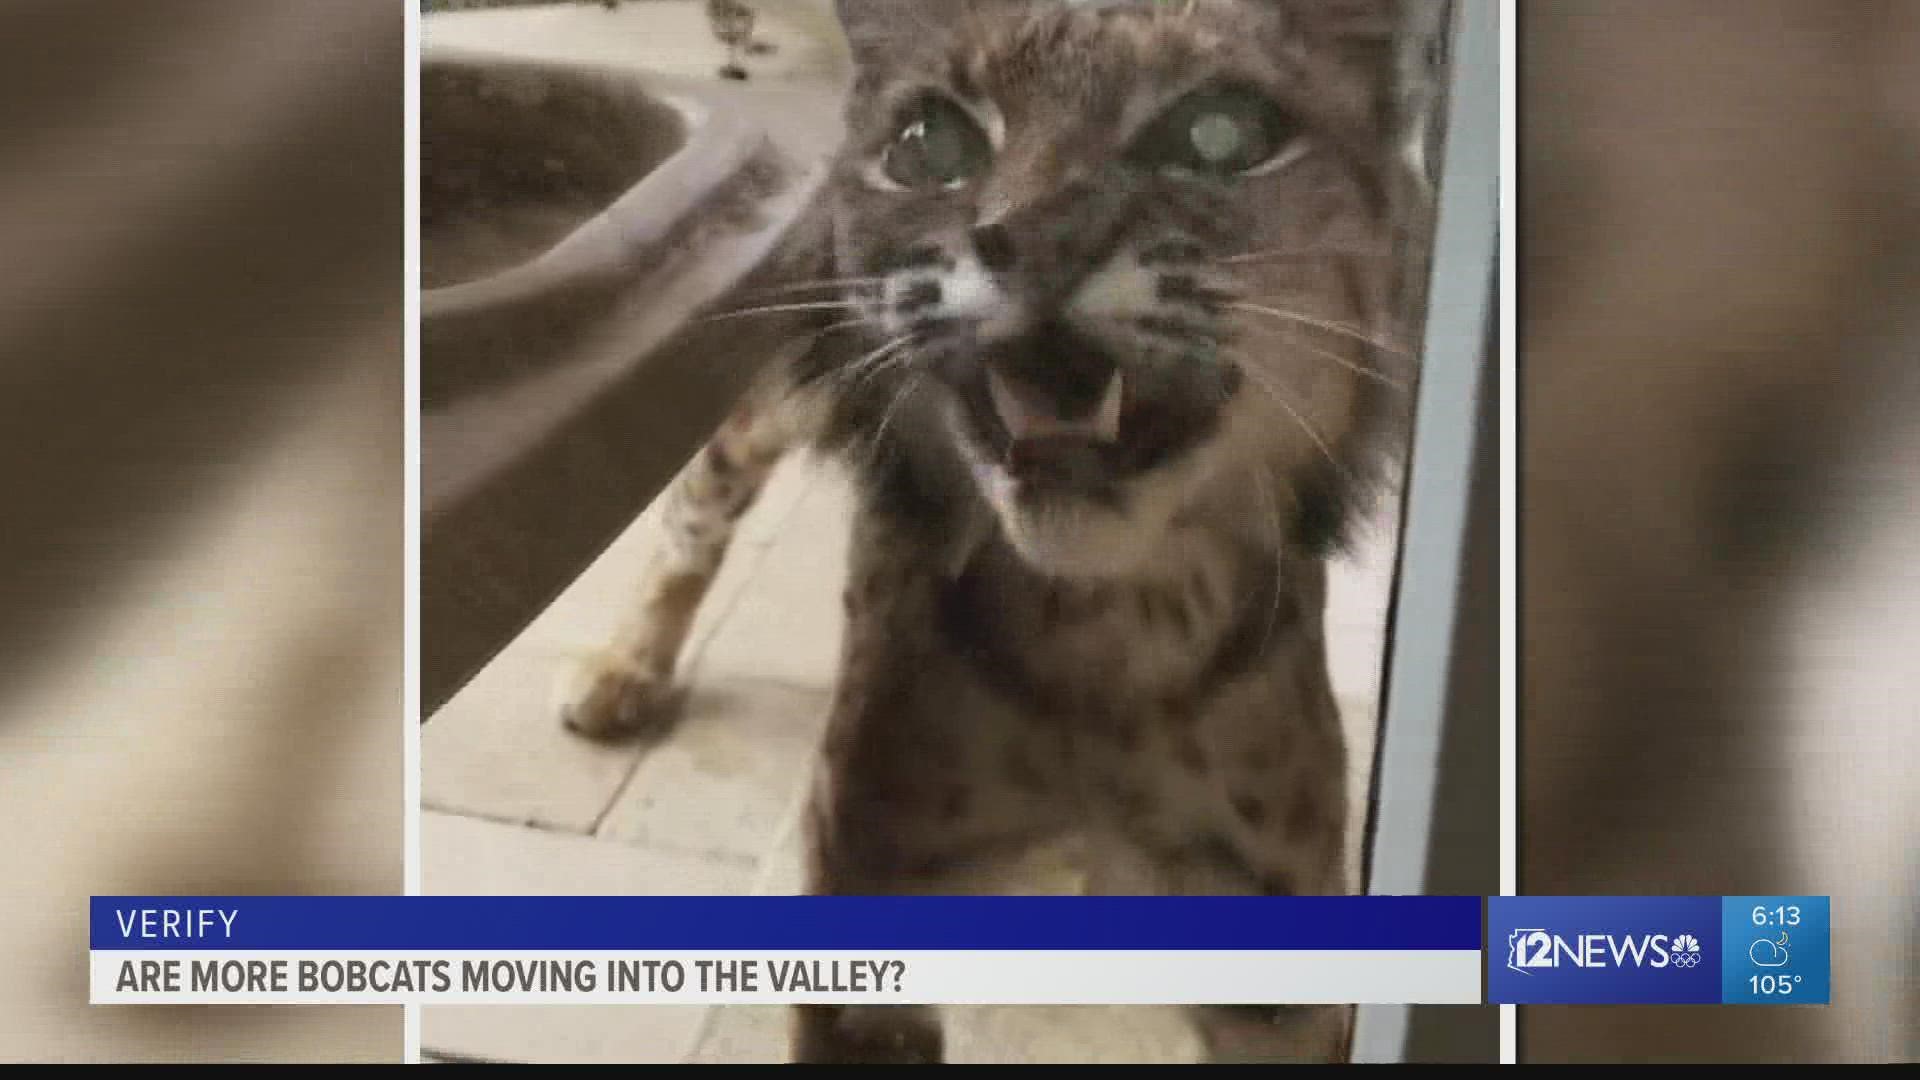 Wild weather and construction have left bobcats in the state looking for new homes.